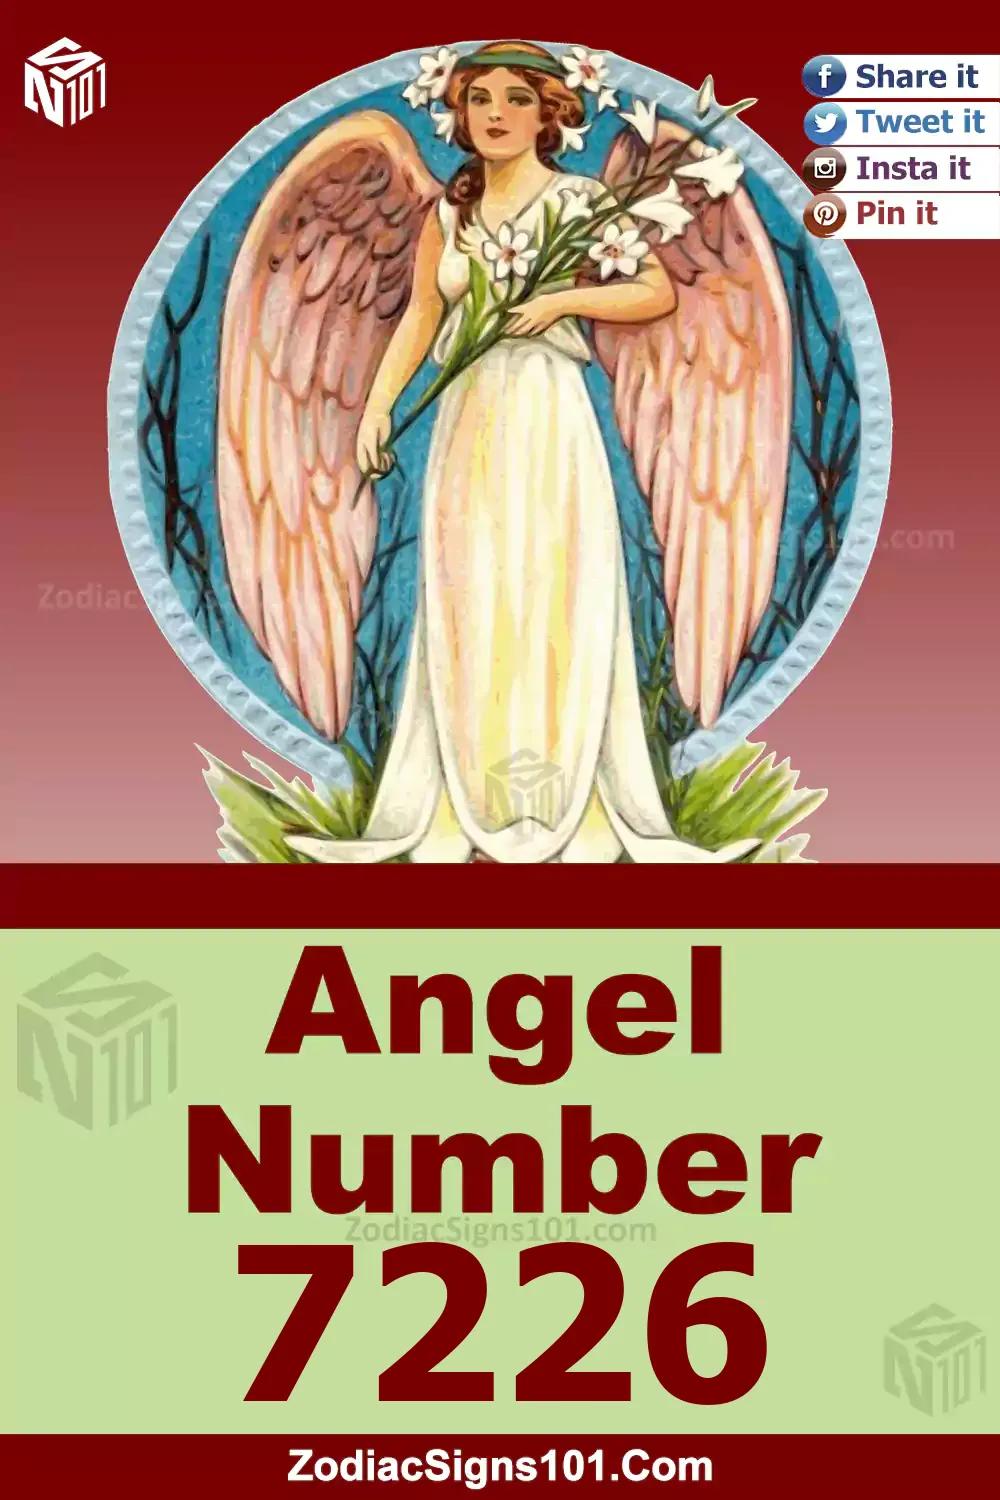 7226 Angel Number Meaning